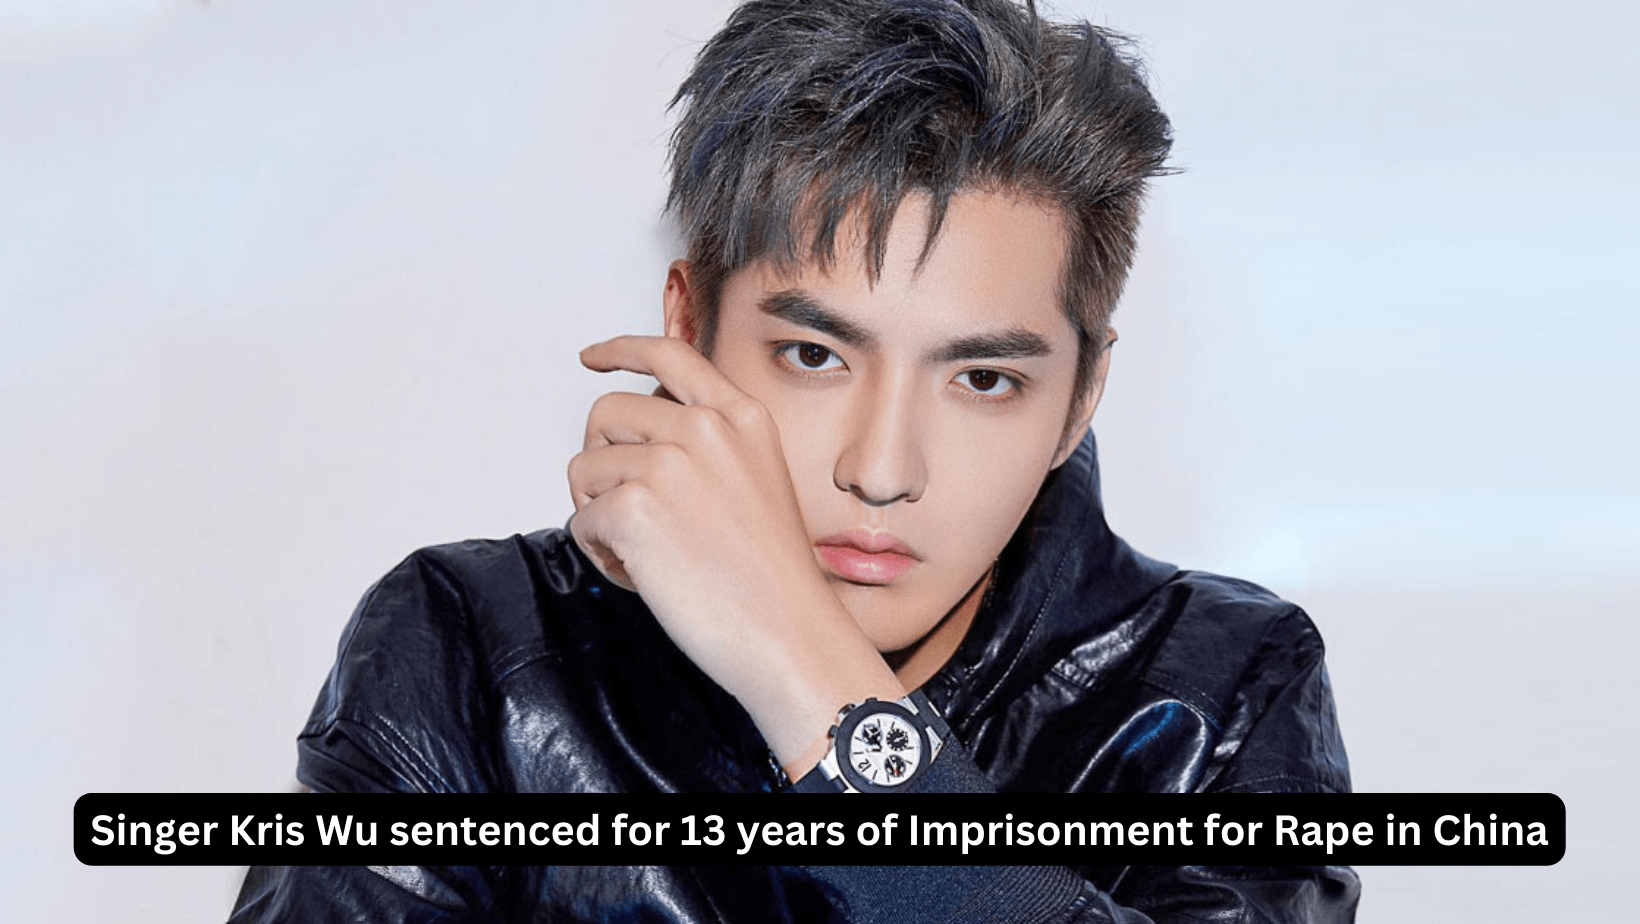 Singer Kris Wu sentenced for 13 years of Imprisonment for Rape in China